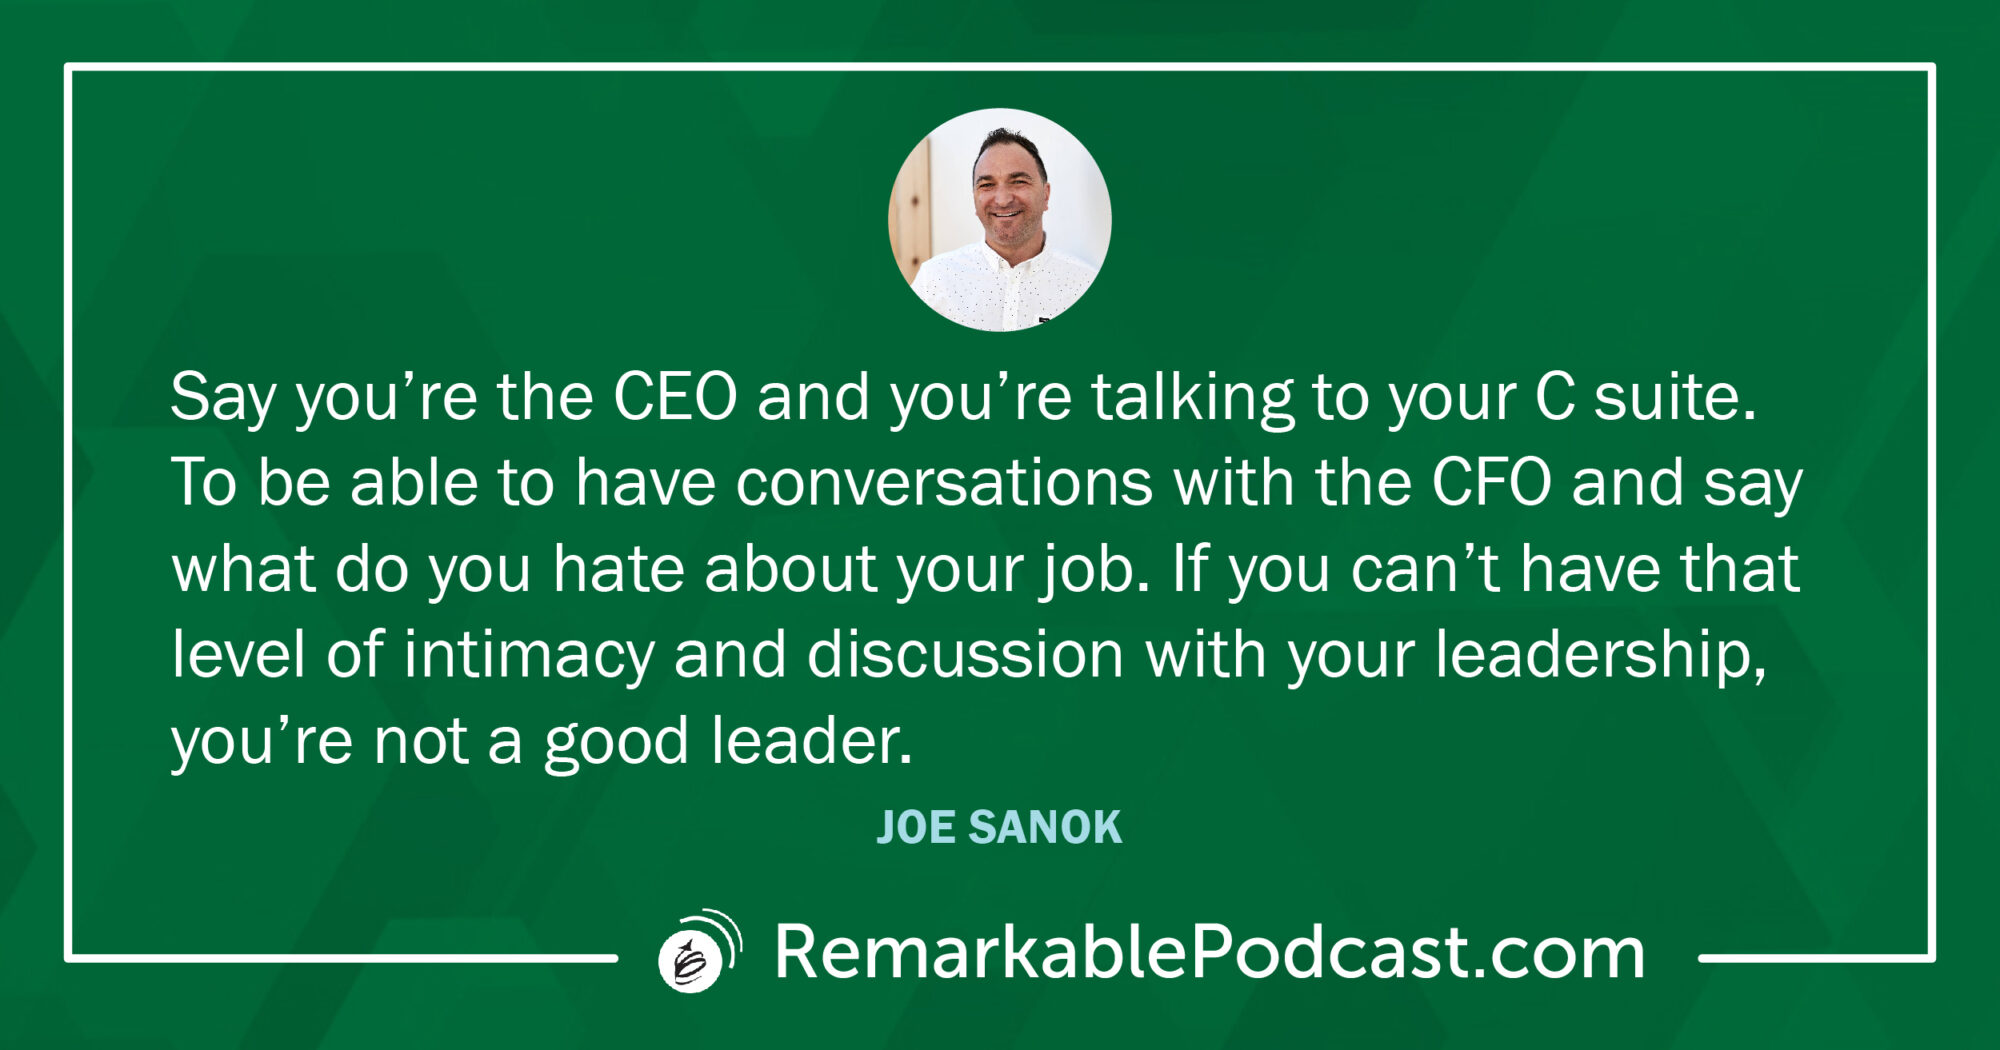 Quote Image: Say you’re the CEO and you’re talking to your C suite. To be able to have conversations with the CFO and say what do you hate about your job. If you can’t have that level of intimacy and discussion with your leadership, you’re not a good leader. Said by Joe Sanok